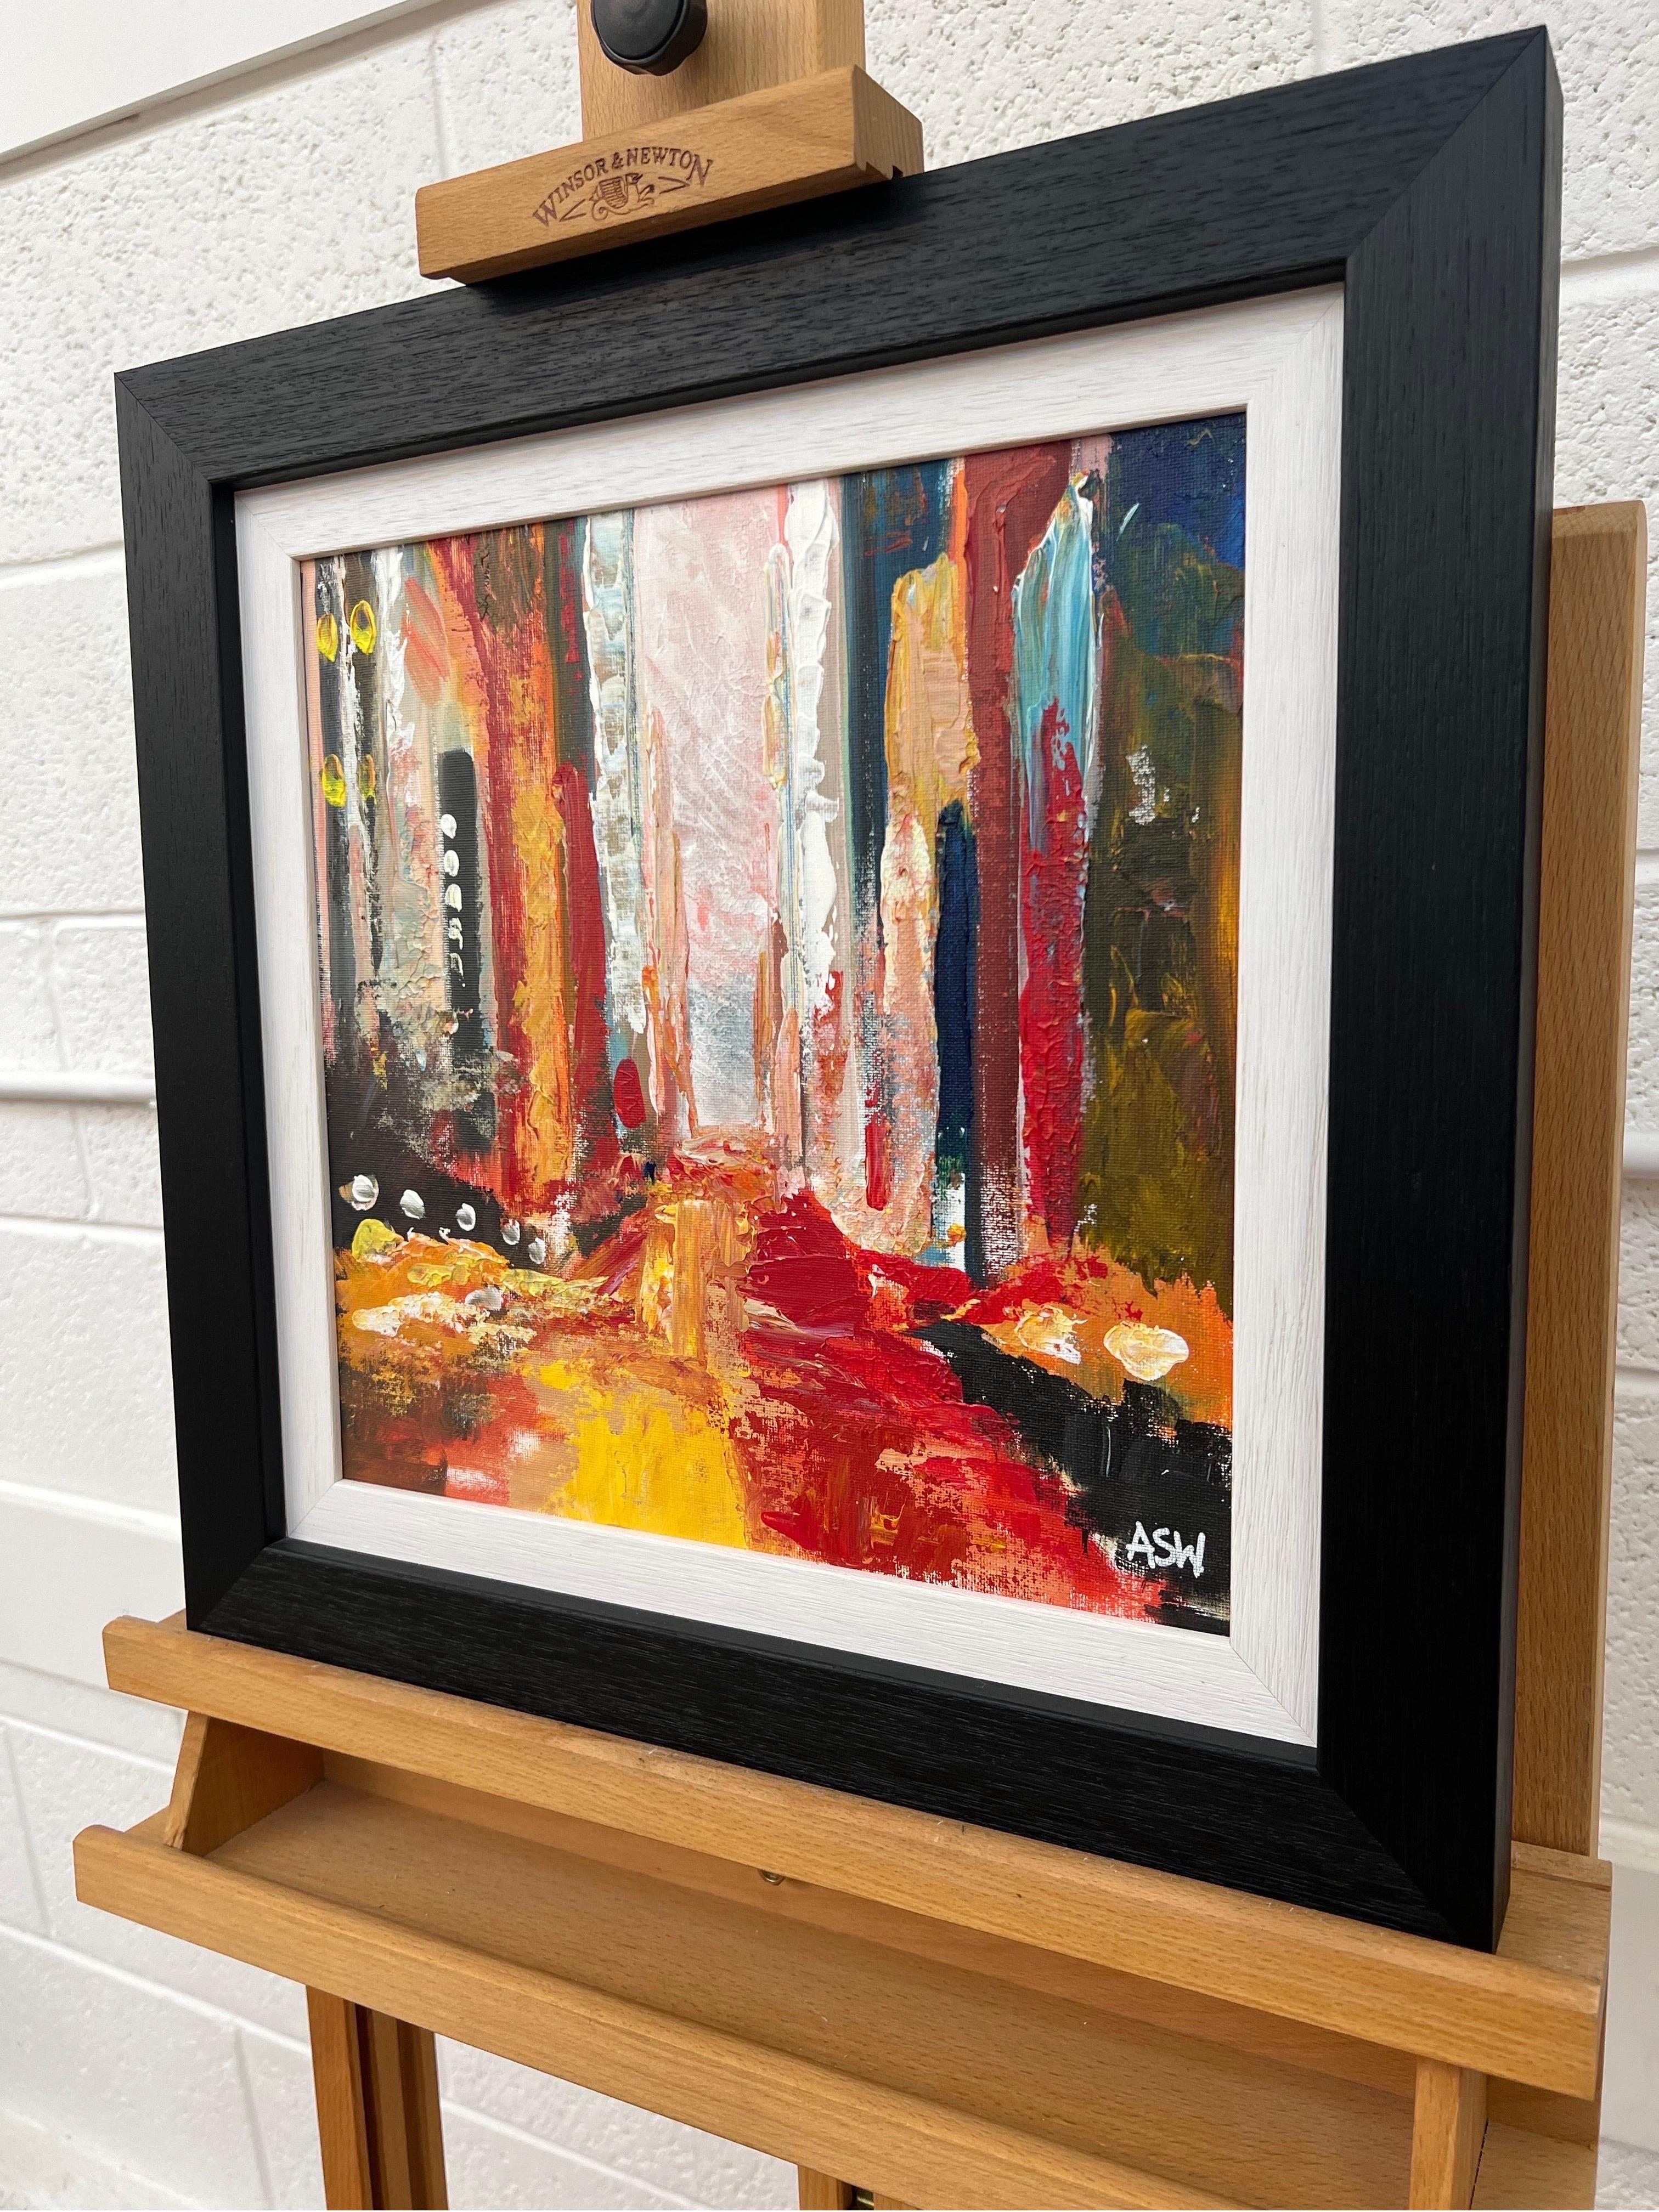 Colourful Red Impasto Abstract Interpretation of New York City by leading British Landscape Artist, Angela Wakefield.

Art measures 12 x 12 inches
Frame measure 16 x 16 inches

Angela Wakefield has twice been on the front cover of ‘Art of England’